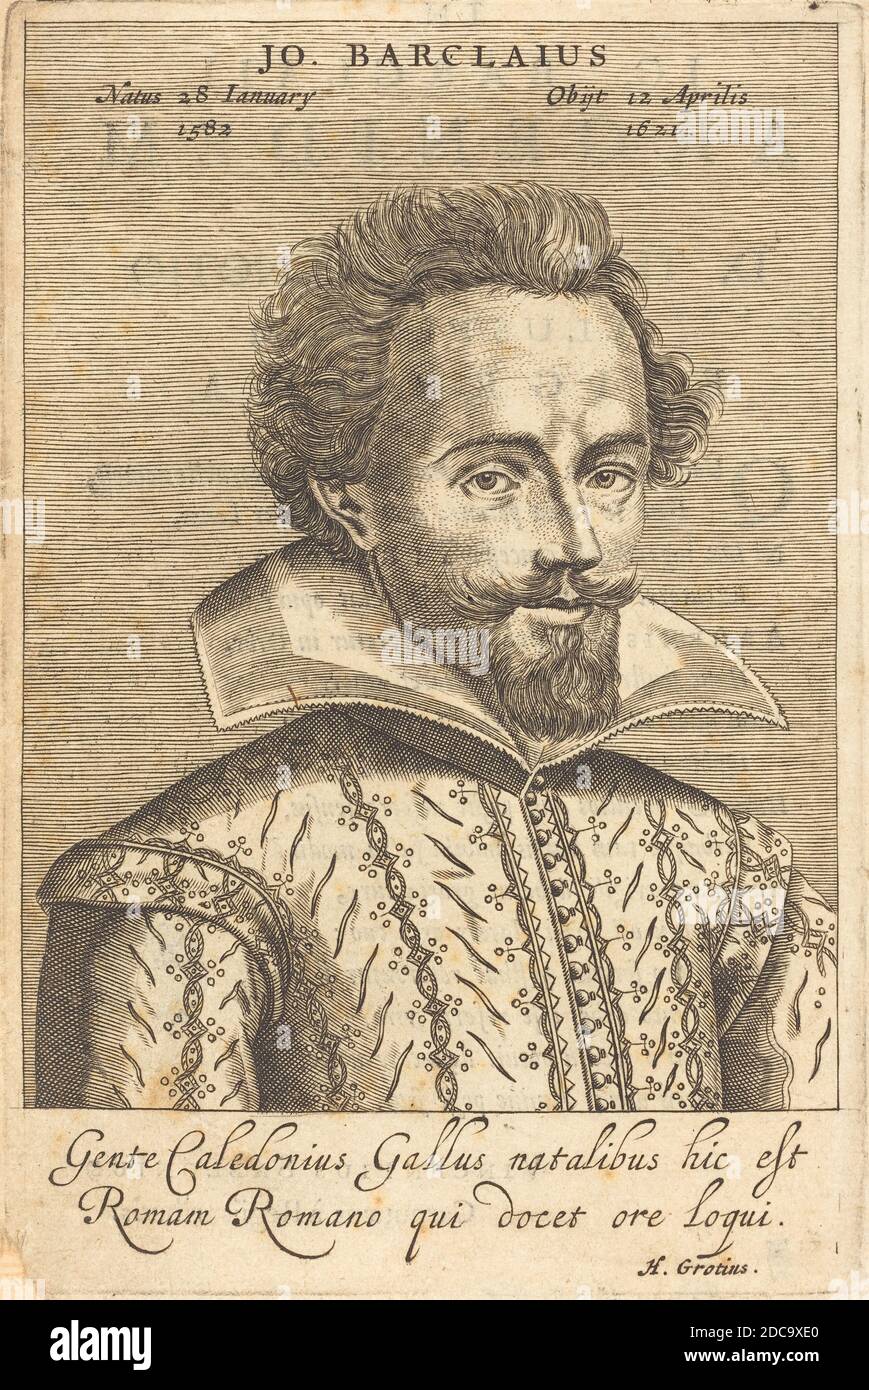 Claude Mellan, (artist), French, 1598 - 1688, Daniel Dumonstier, (artist after), French, 1574 - 1646, John Barclay, published 1623, engraving, plate: 15 × 10 cm (5 7/8 × 3 15/16 in Stock Photo